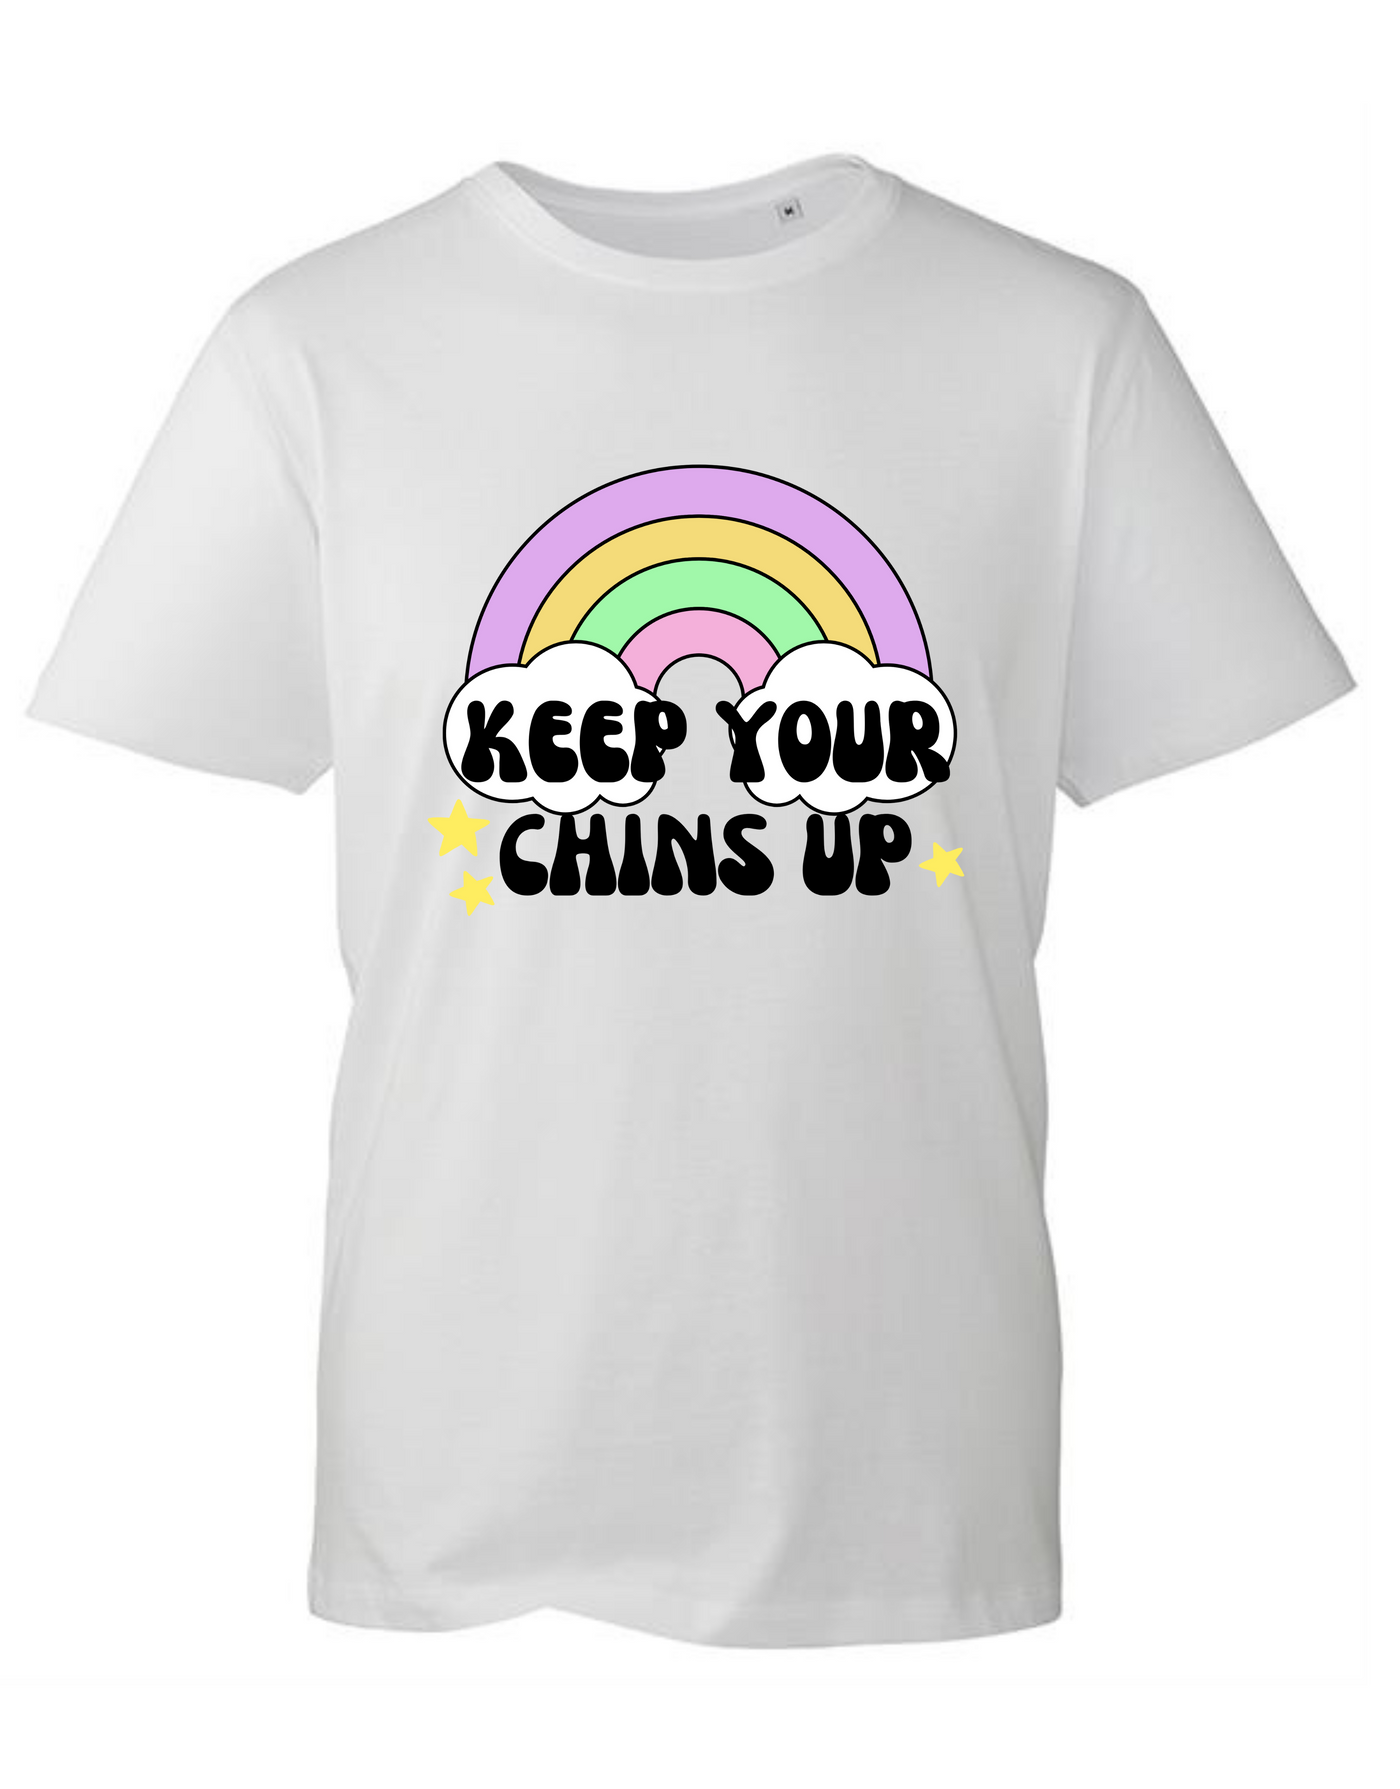 "Keep Your Chins Up" Unisex Organic T-Shirt